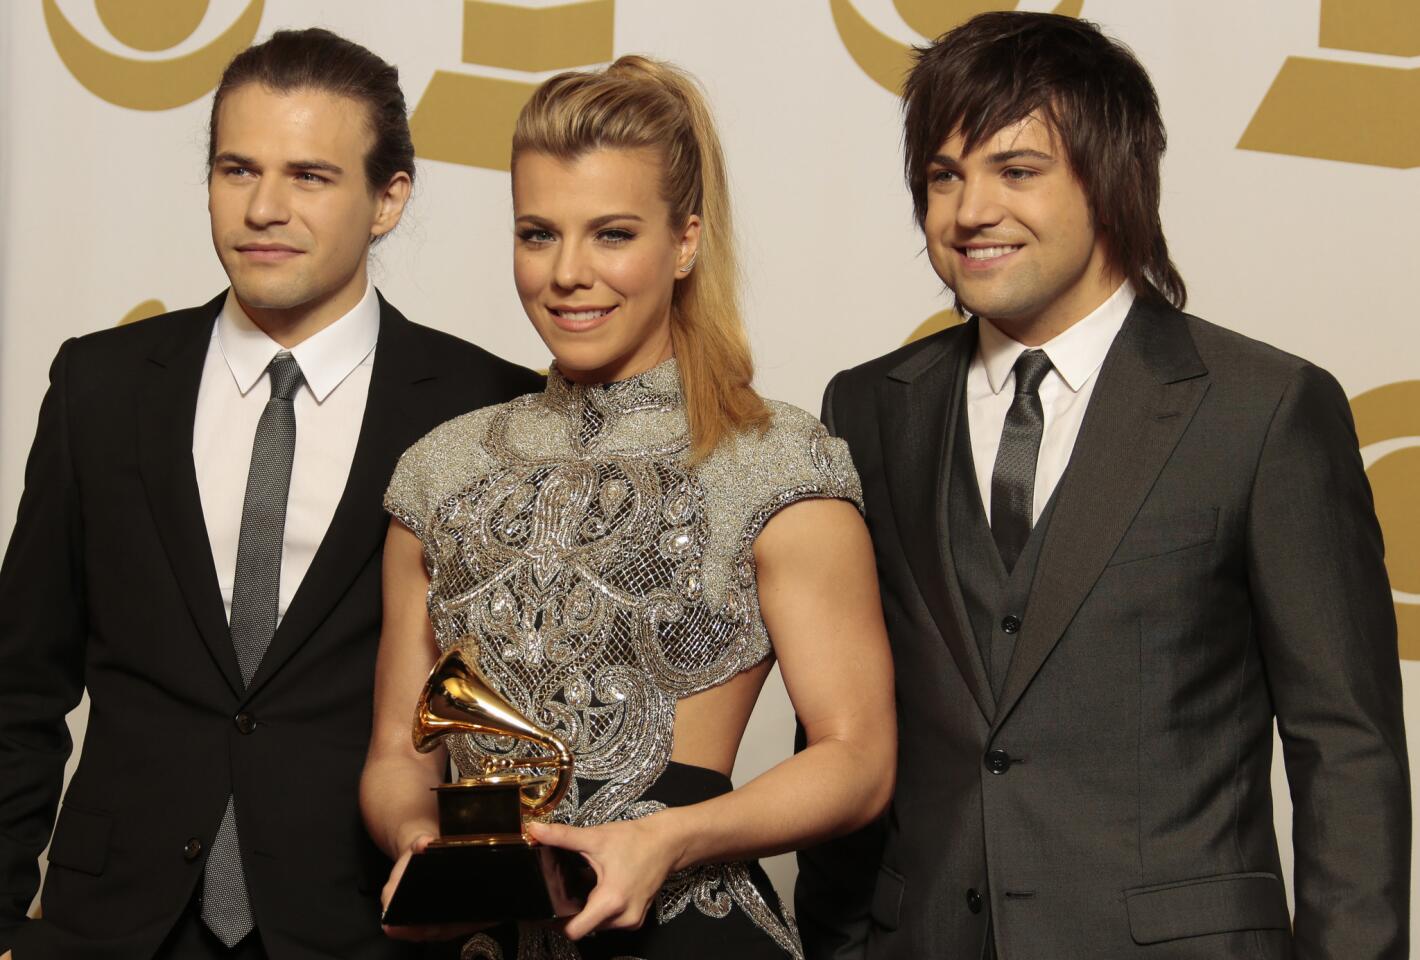 The Band Perry, country duo/group performance winner